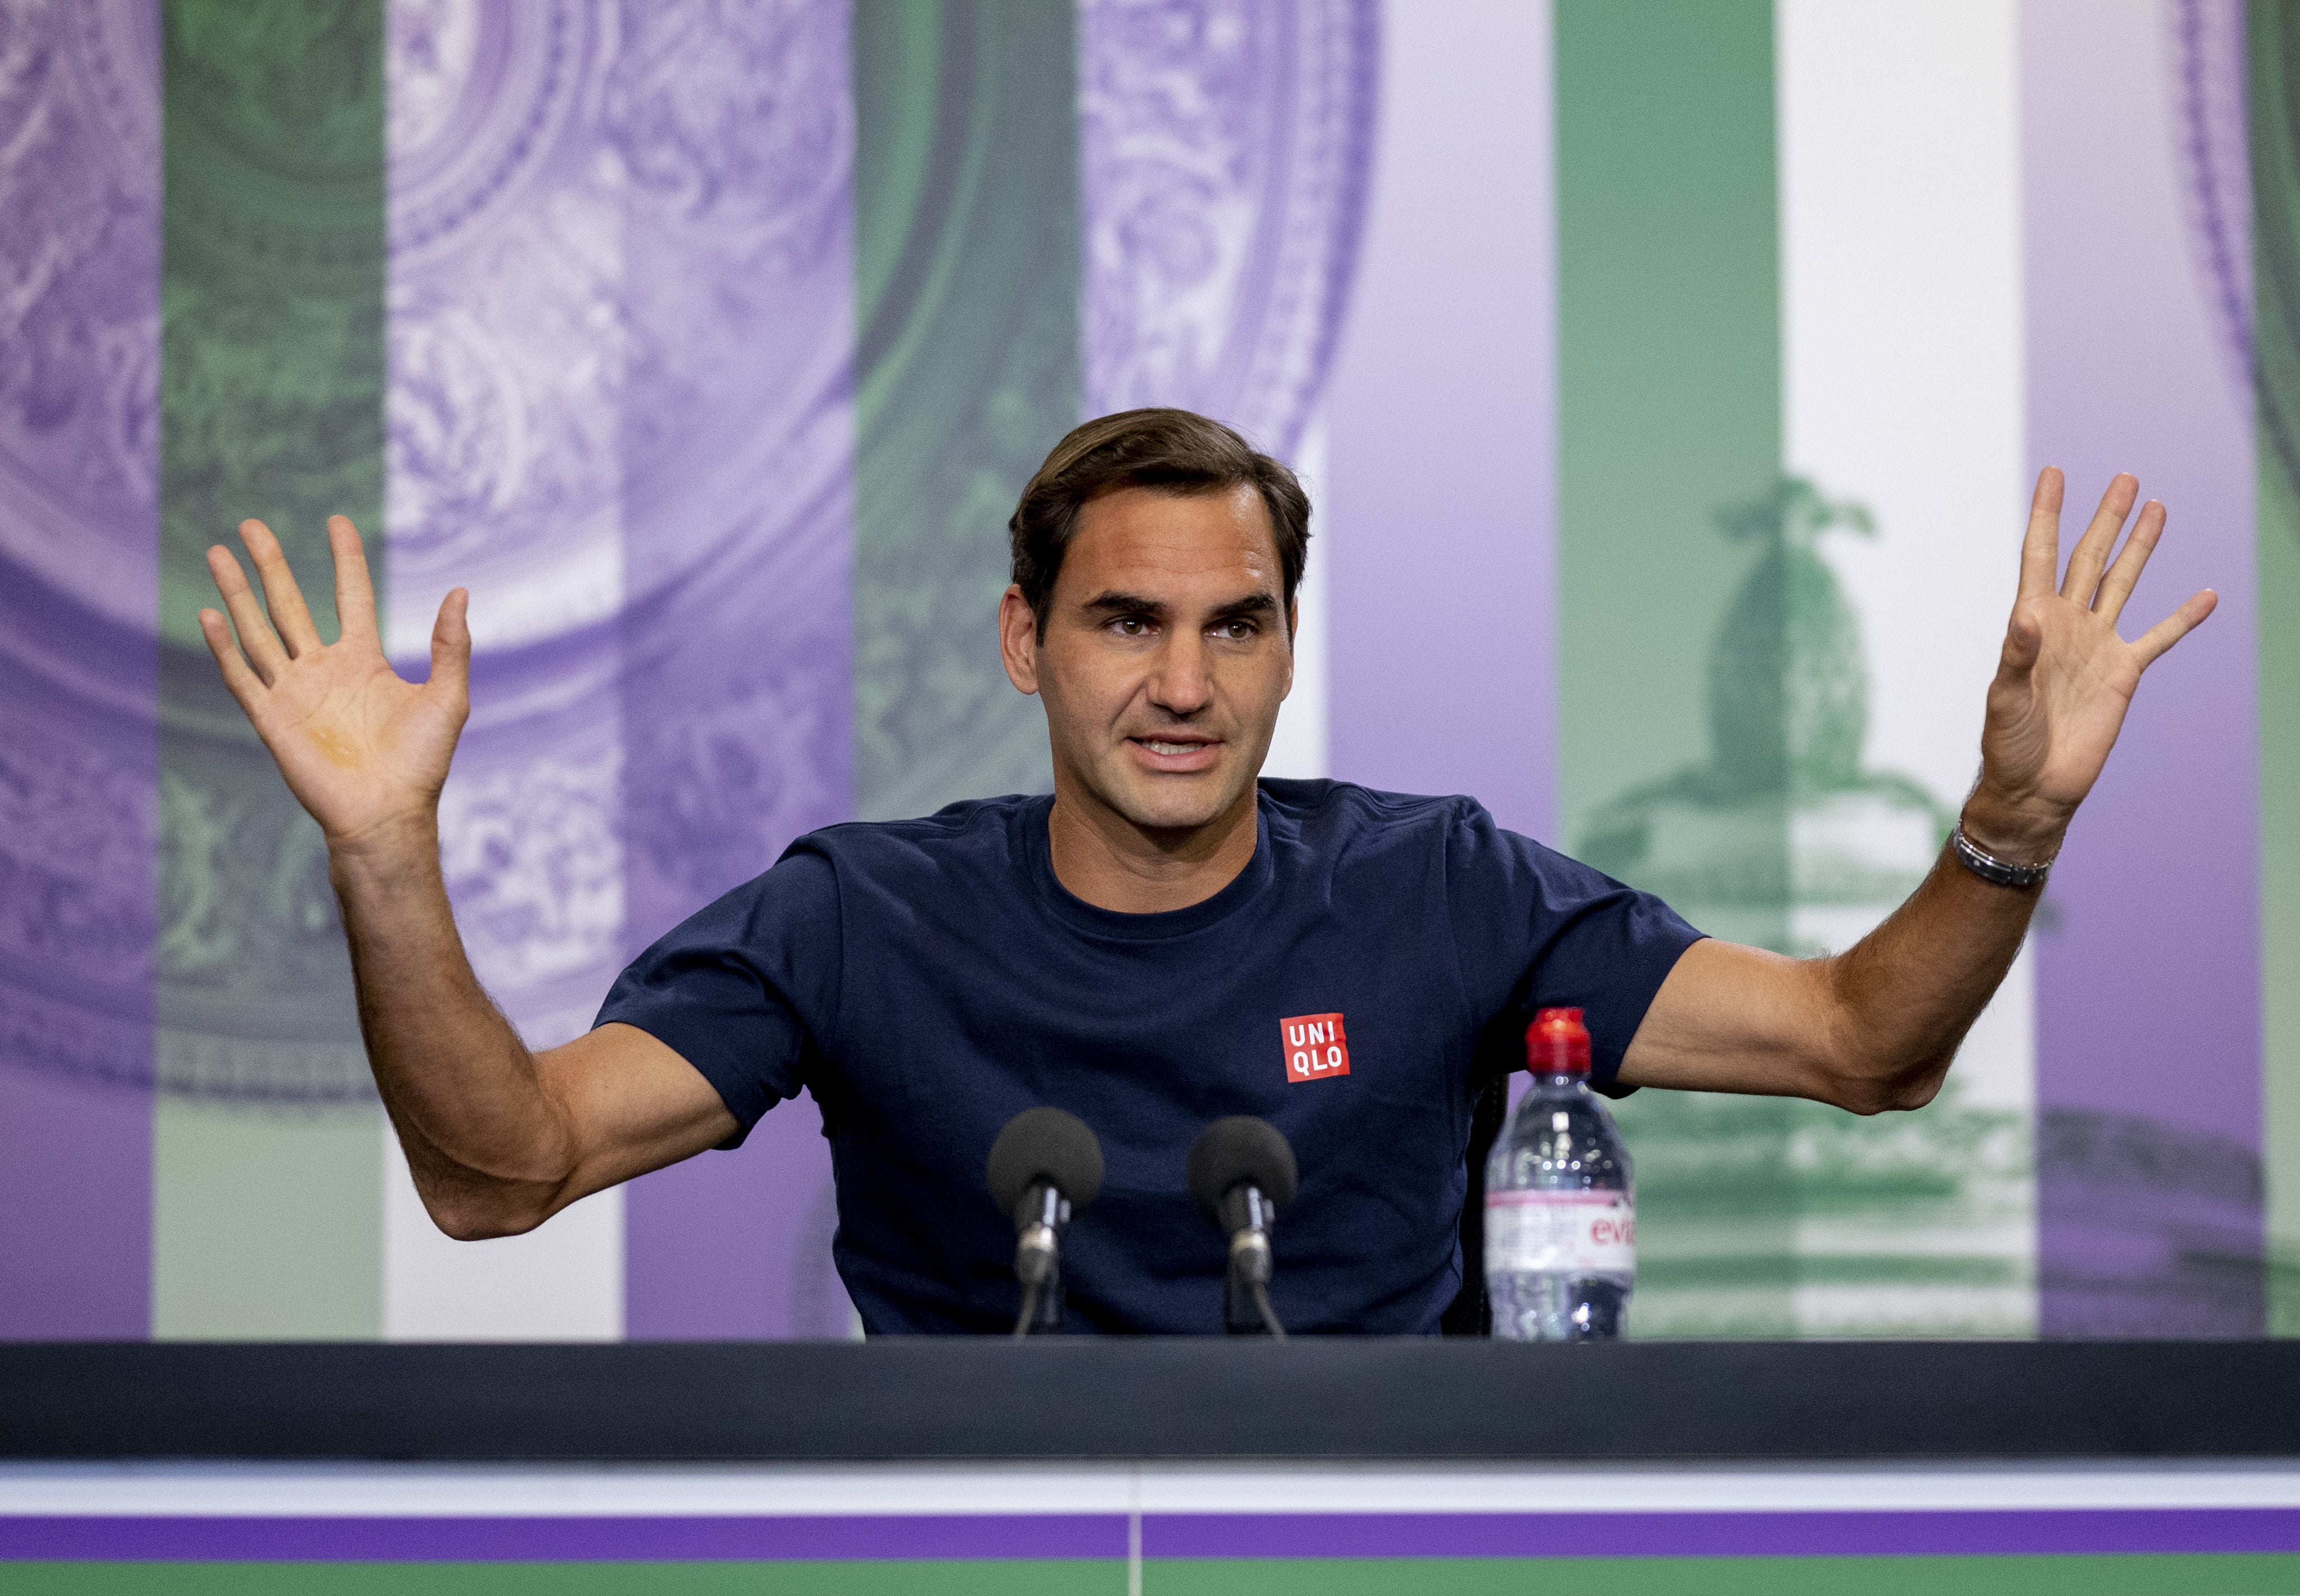 Roger Federer will start his Wimbledon campaign on day two